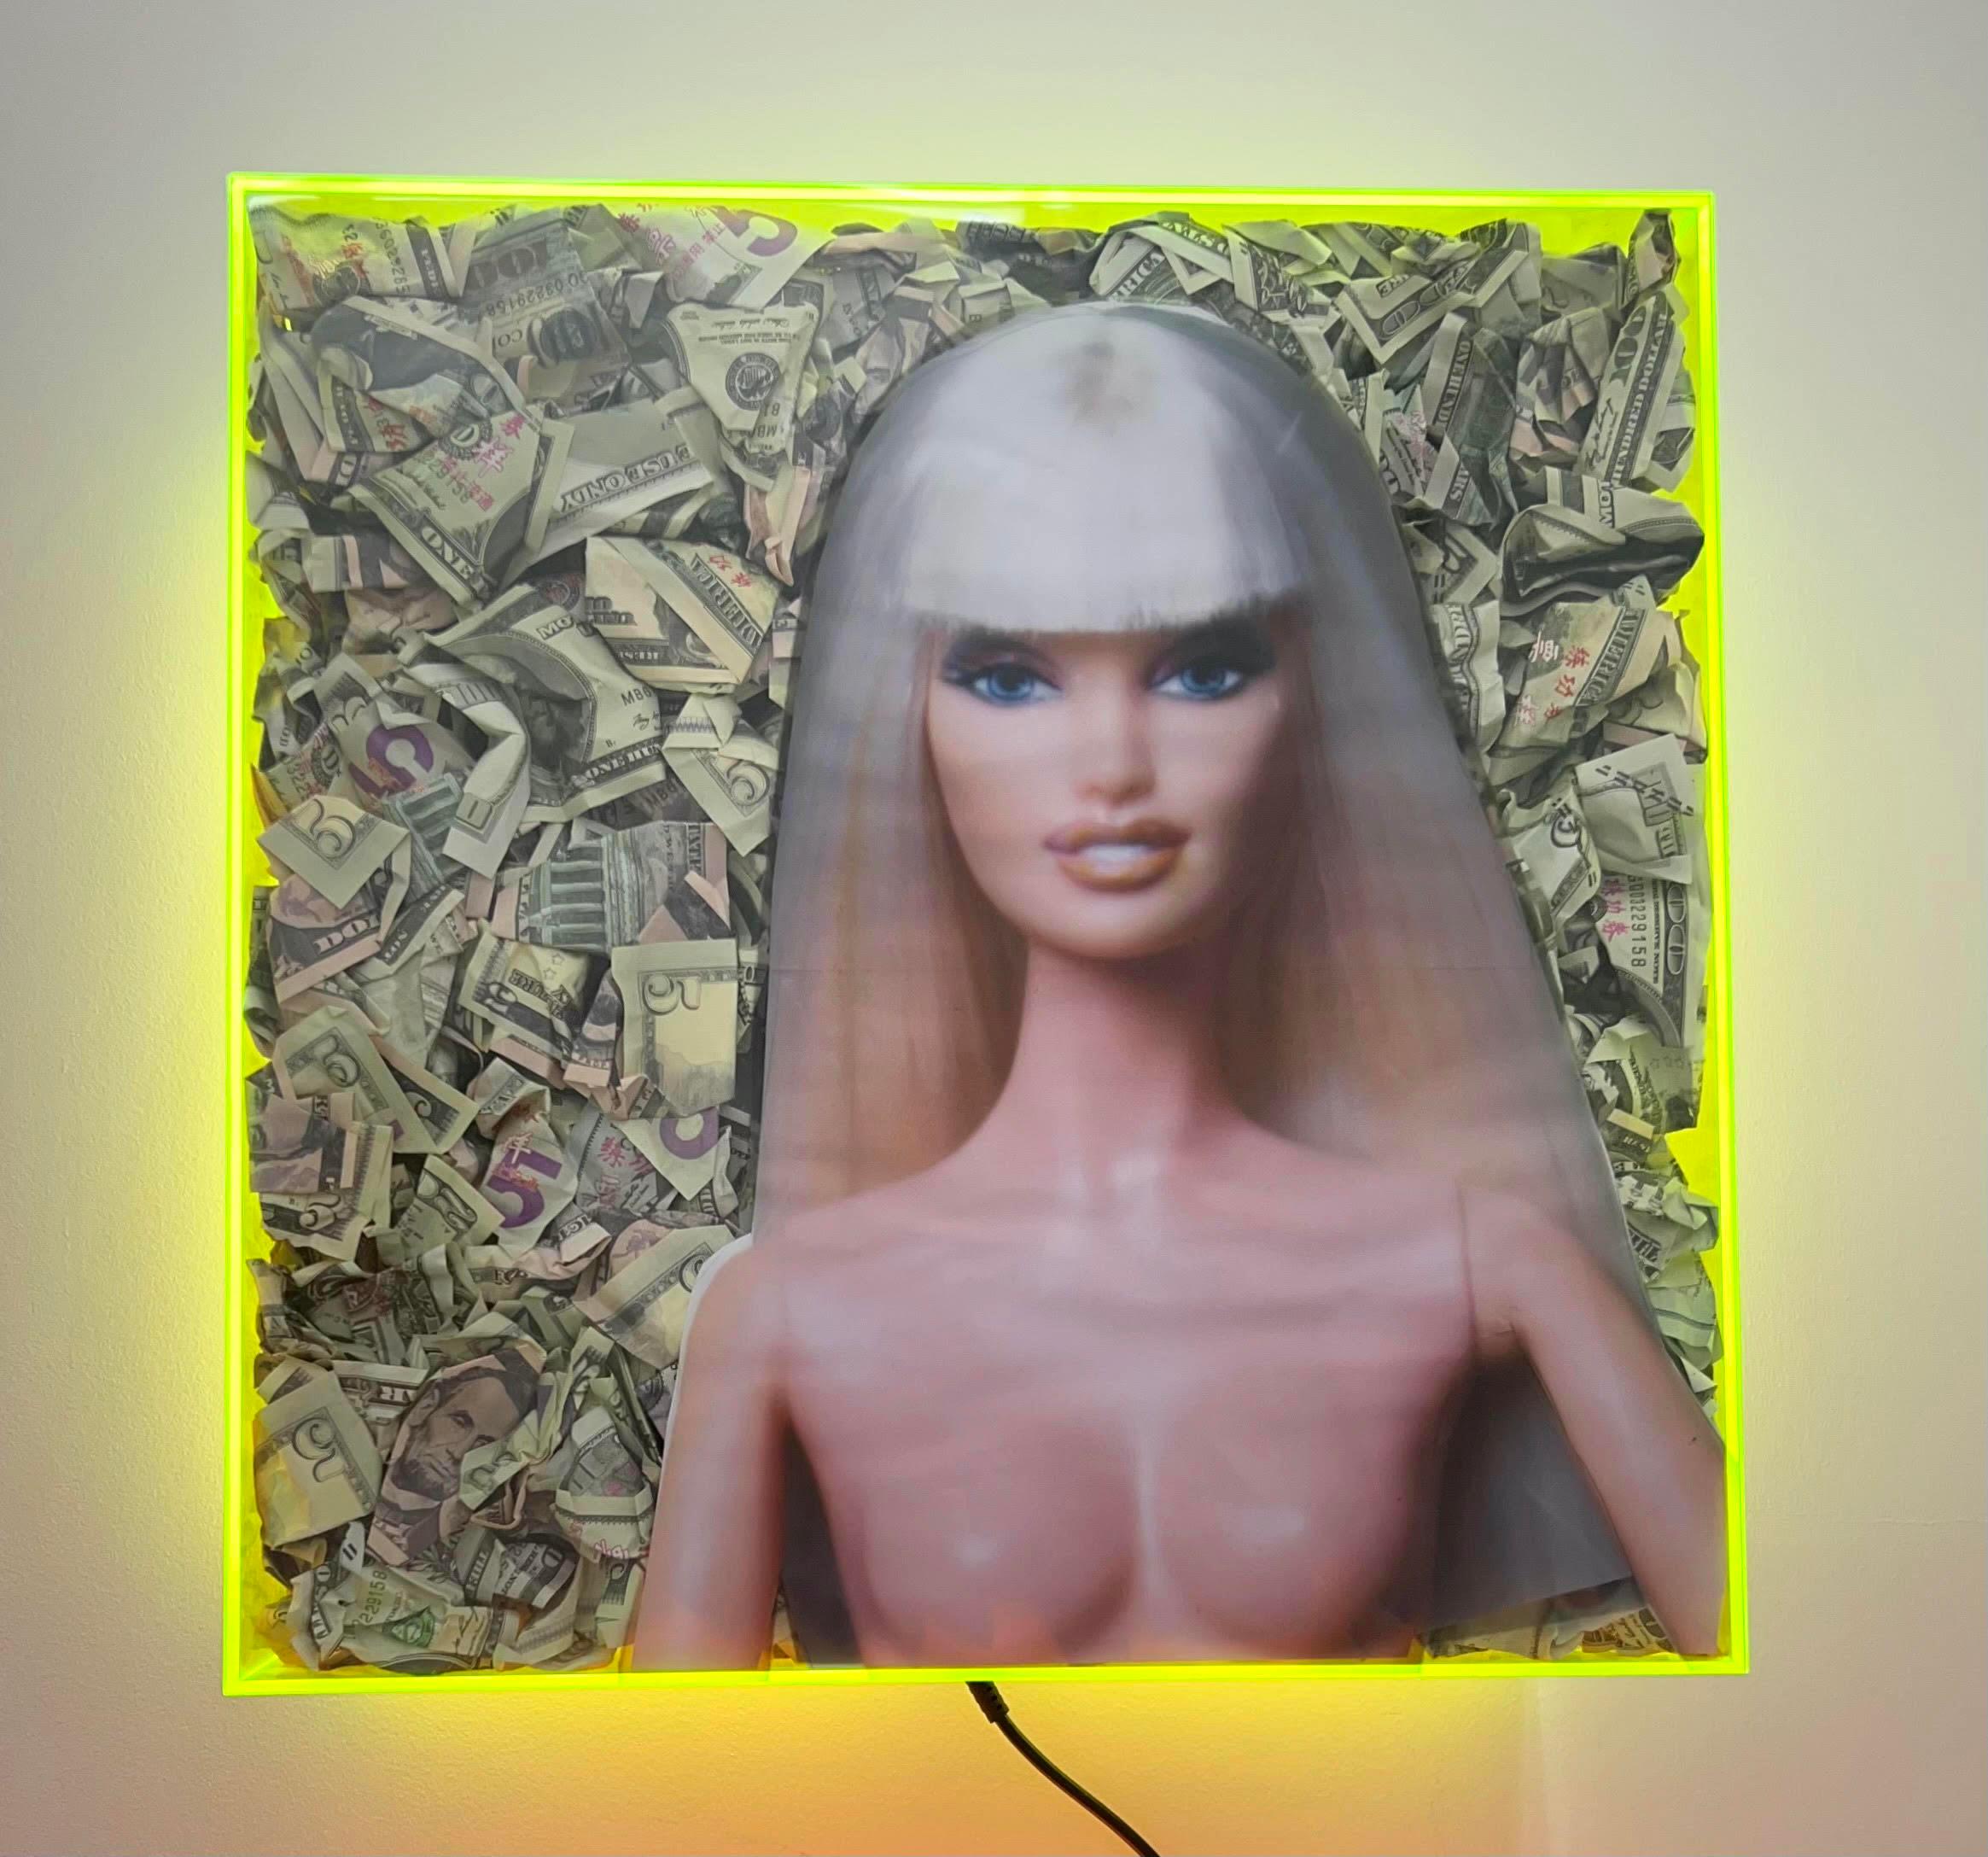 June 2020, Unique Edition
Mix Media paper wax and plexyglass with protective Cap Plexiglas with LED
15 7/10 × 15 7/10 × 7 9/10 in - 40 × 40 × 20 cm
The artwork is dated, numbered and signed on a metal label sticked on the protective cap
The artwork